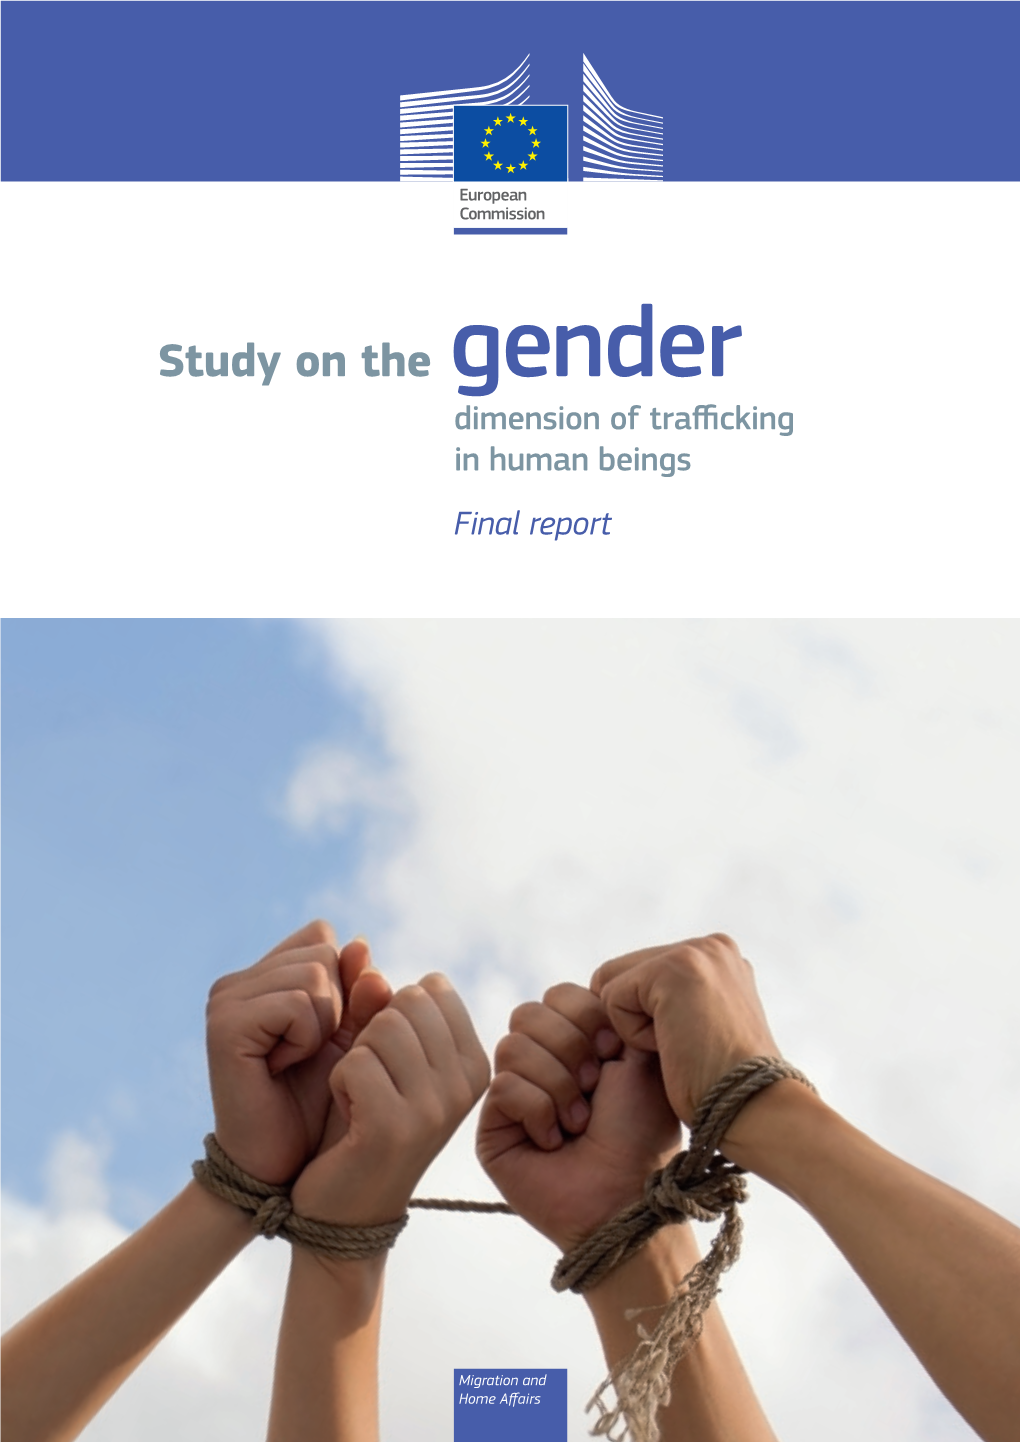 Study on the Gender Dimension of Trafficking in Human Beings Final Report